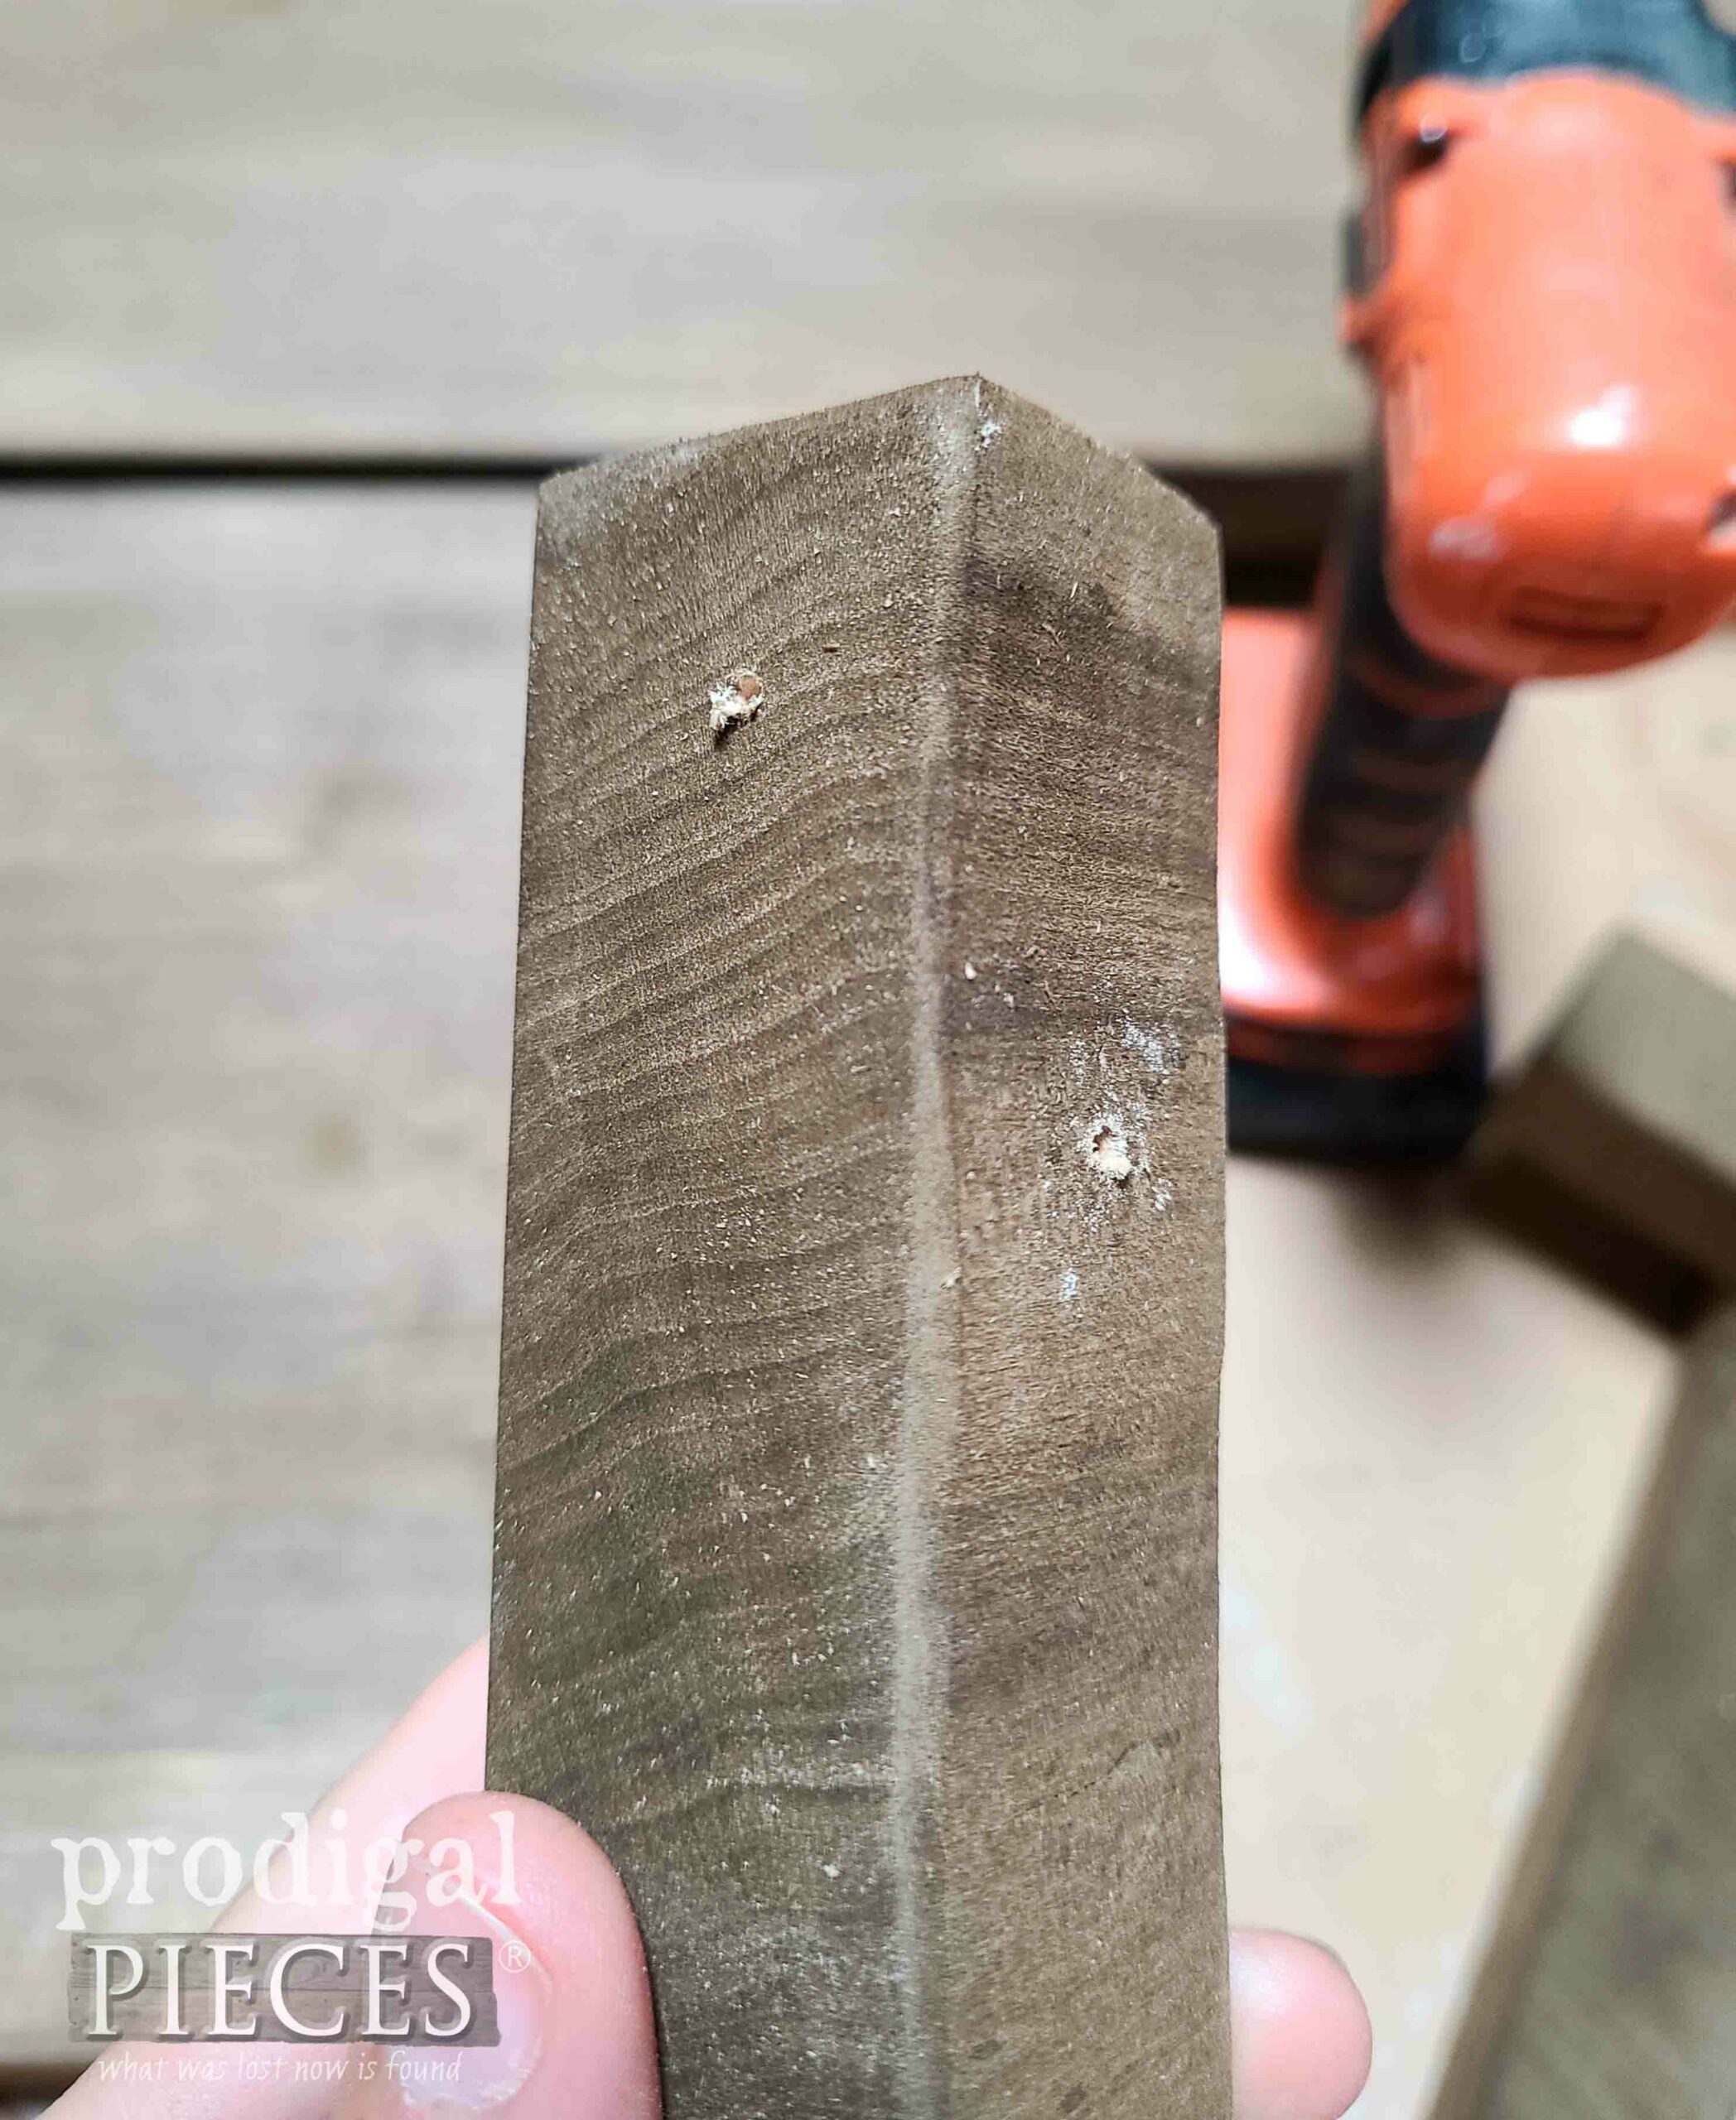 Drilled Support Holes for Reclaimed Wood Bench | prodigalpieces.com #prodigalpieces